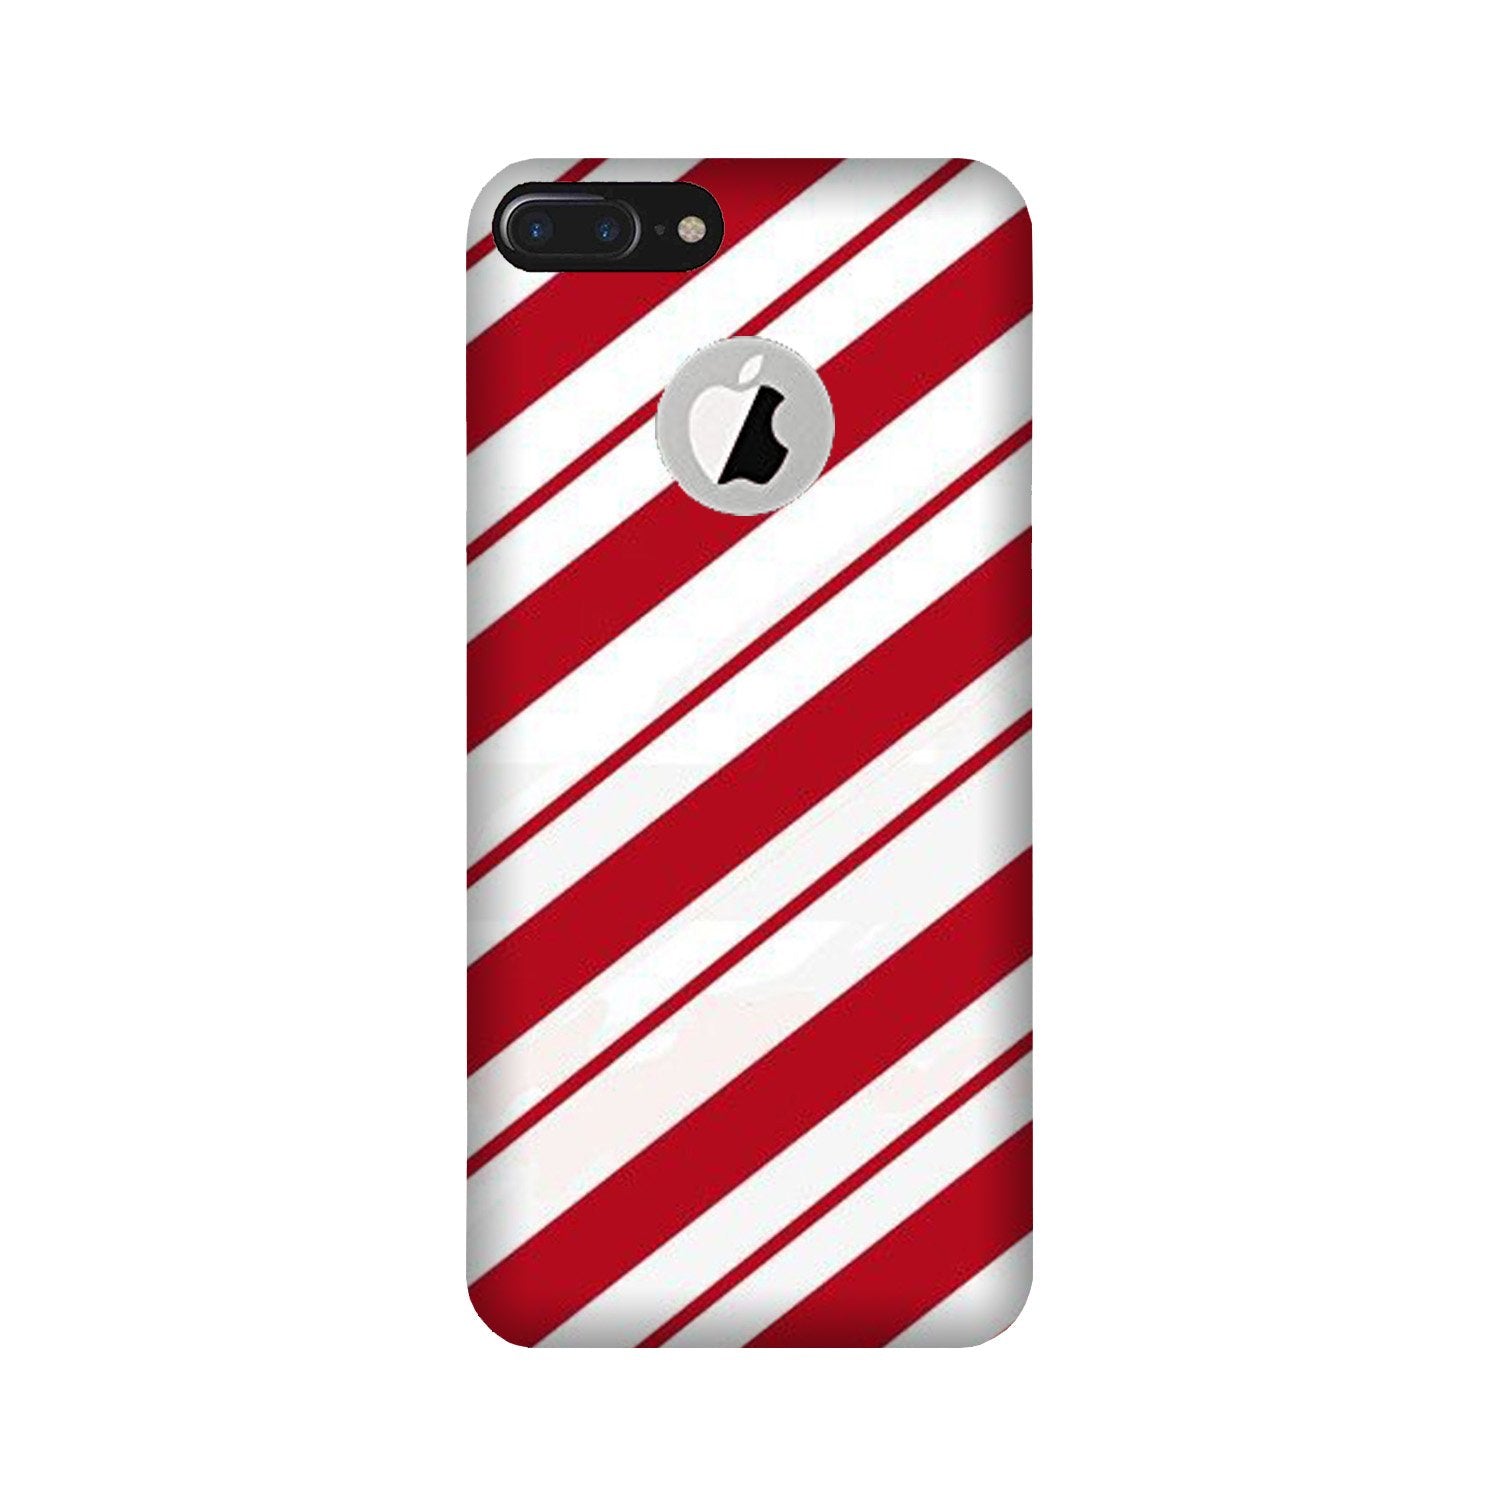 Red White Case for iPhone 7 Plus logo cut